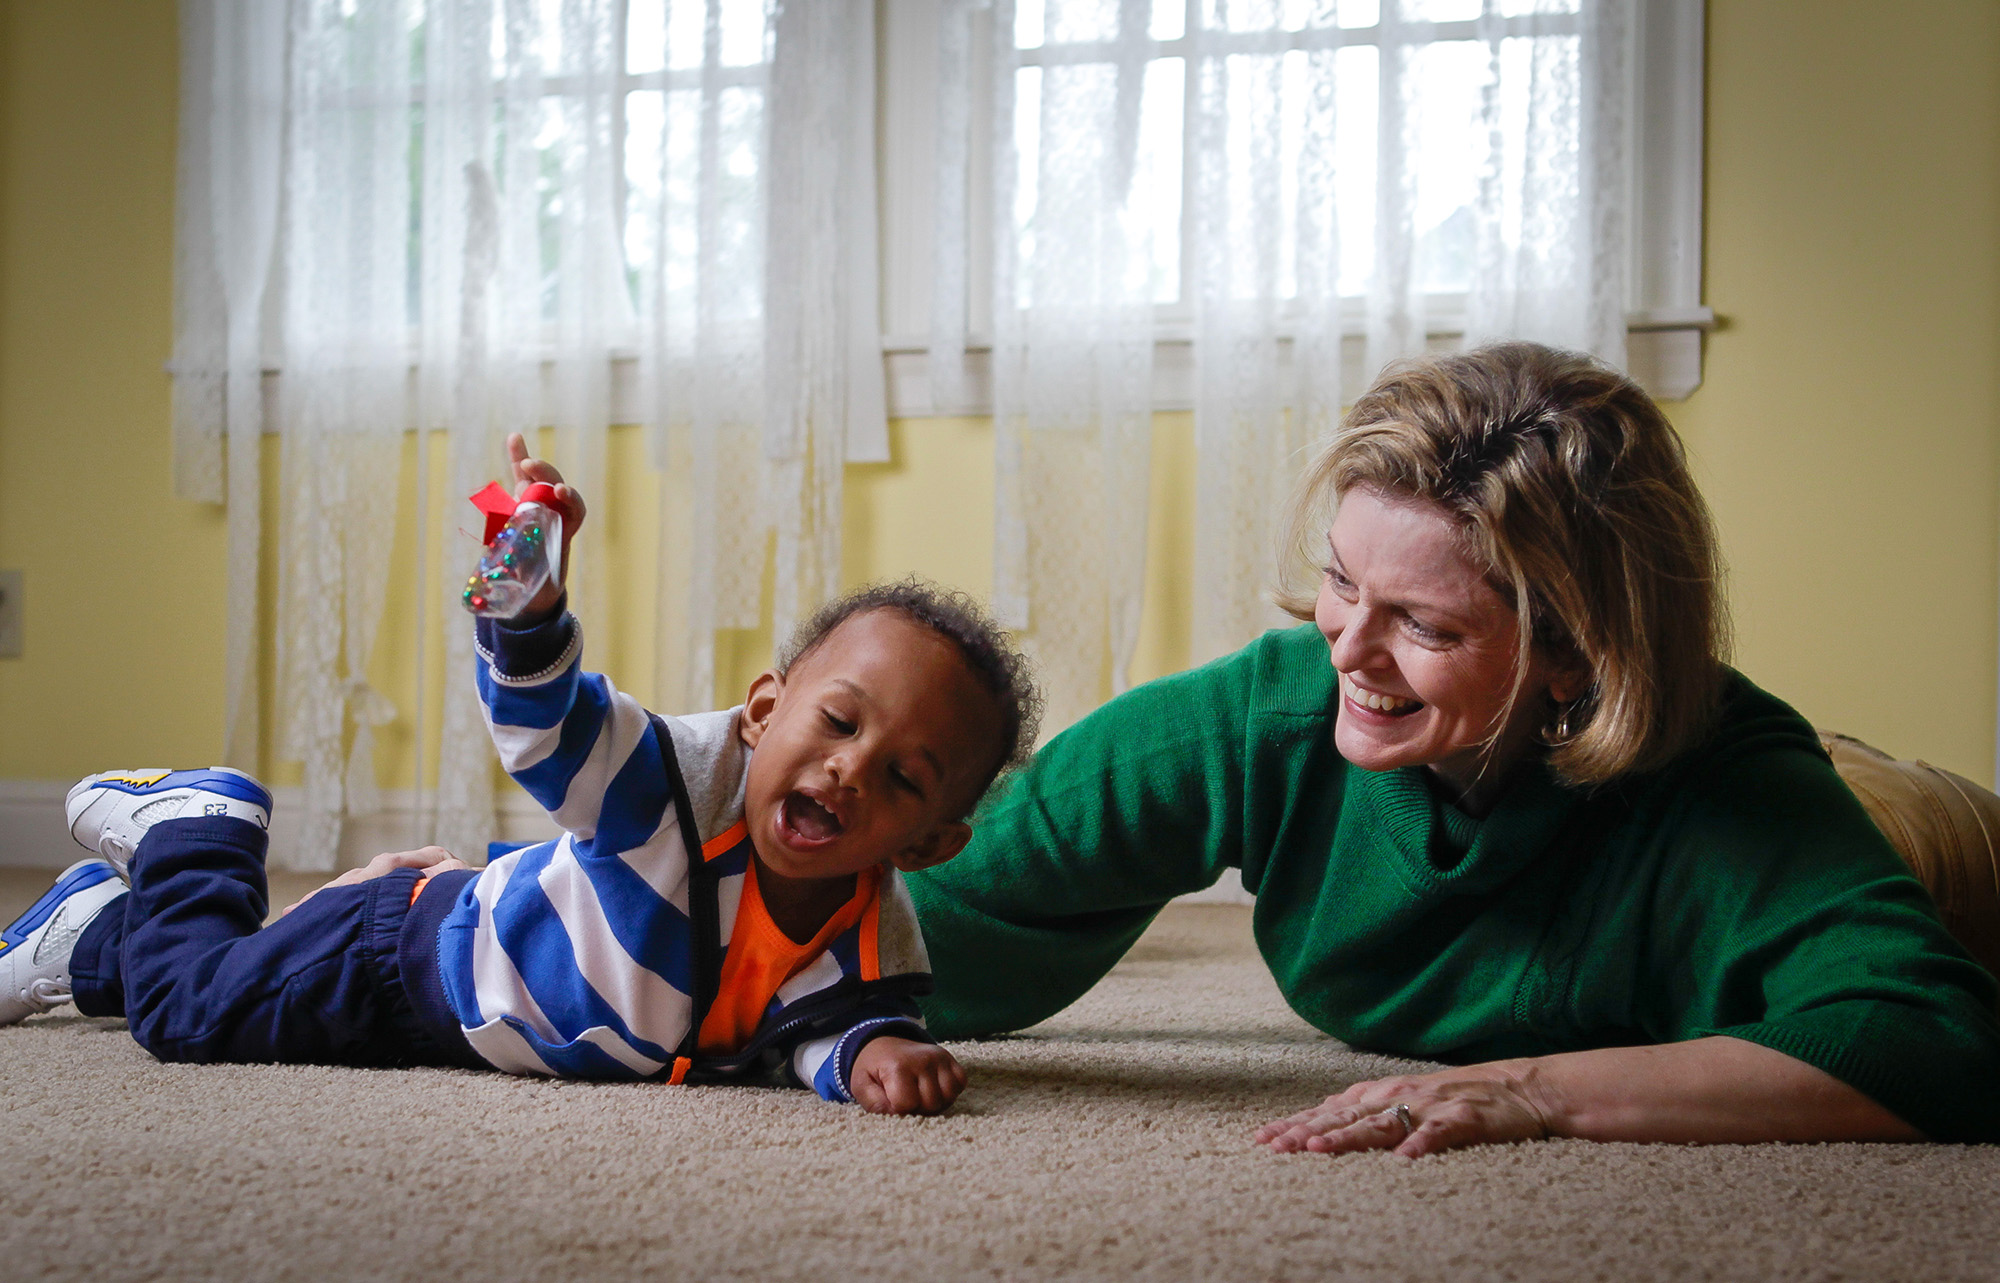 Anne Zachry, assistant professor of occupational therapy at UT Health Science Center and author of Retro Baby, plays with Gabriel (Gabe) Lewis, 1, son of Keisha Brooks (Martin ’98, HSC ’99), an assistant professor at UTHSC.